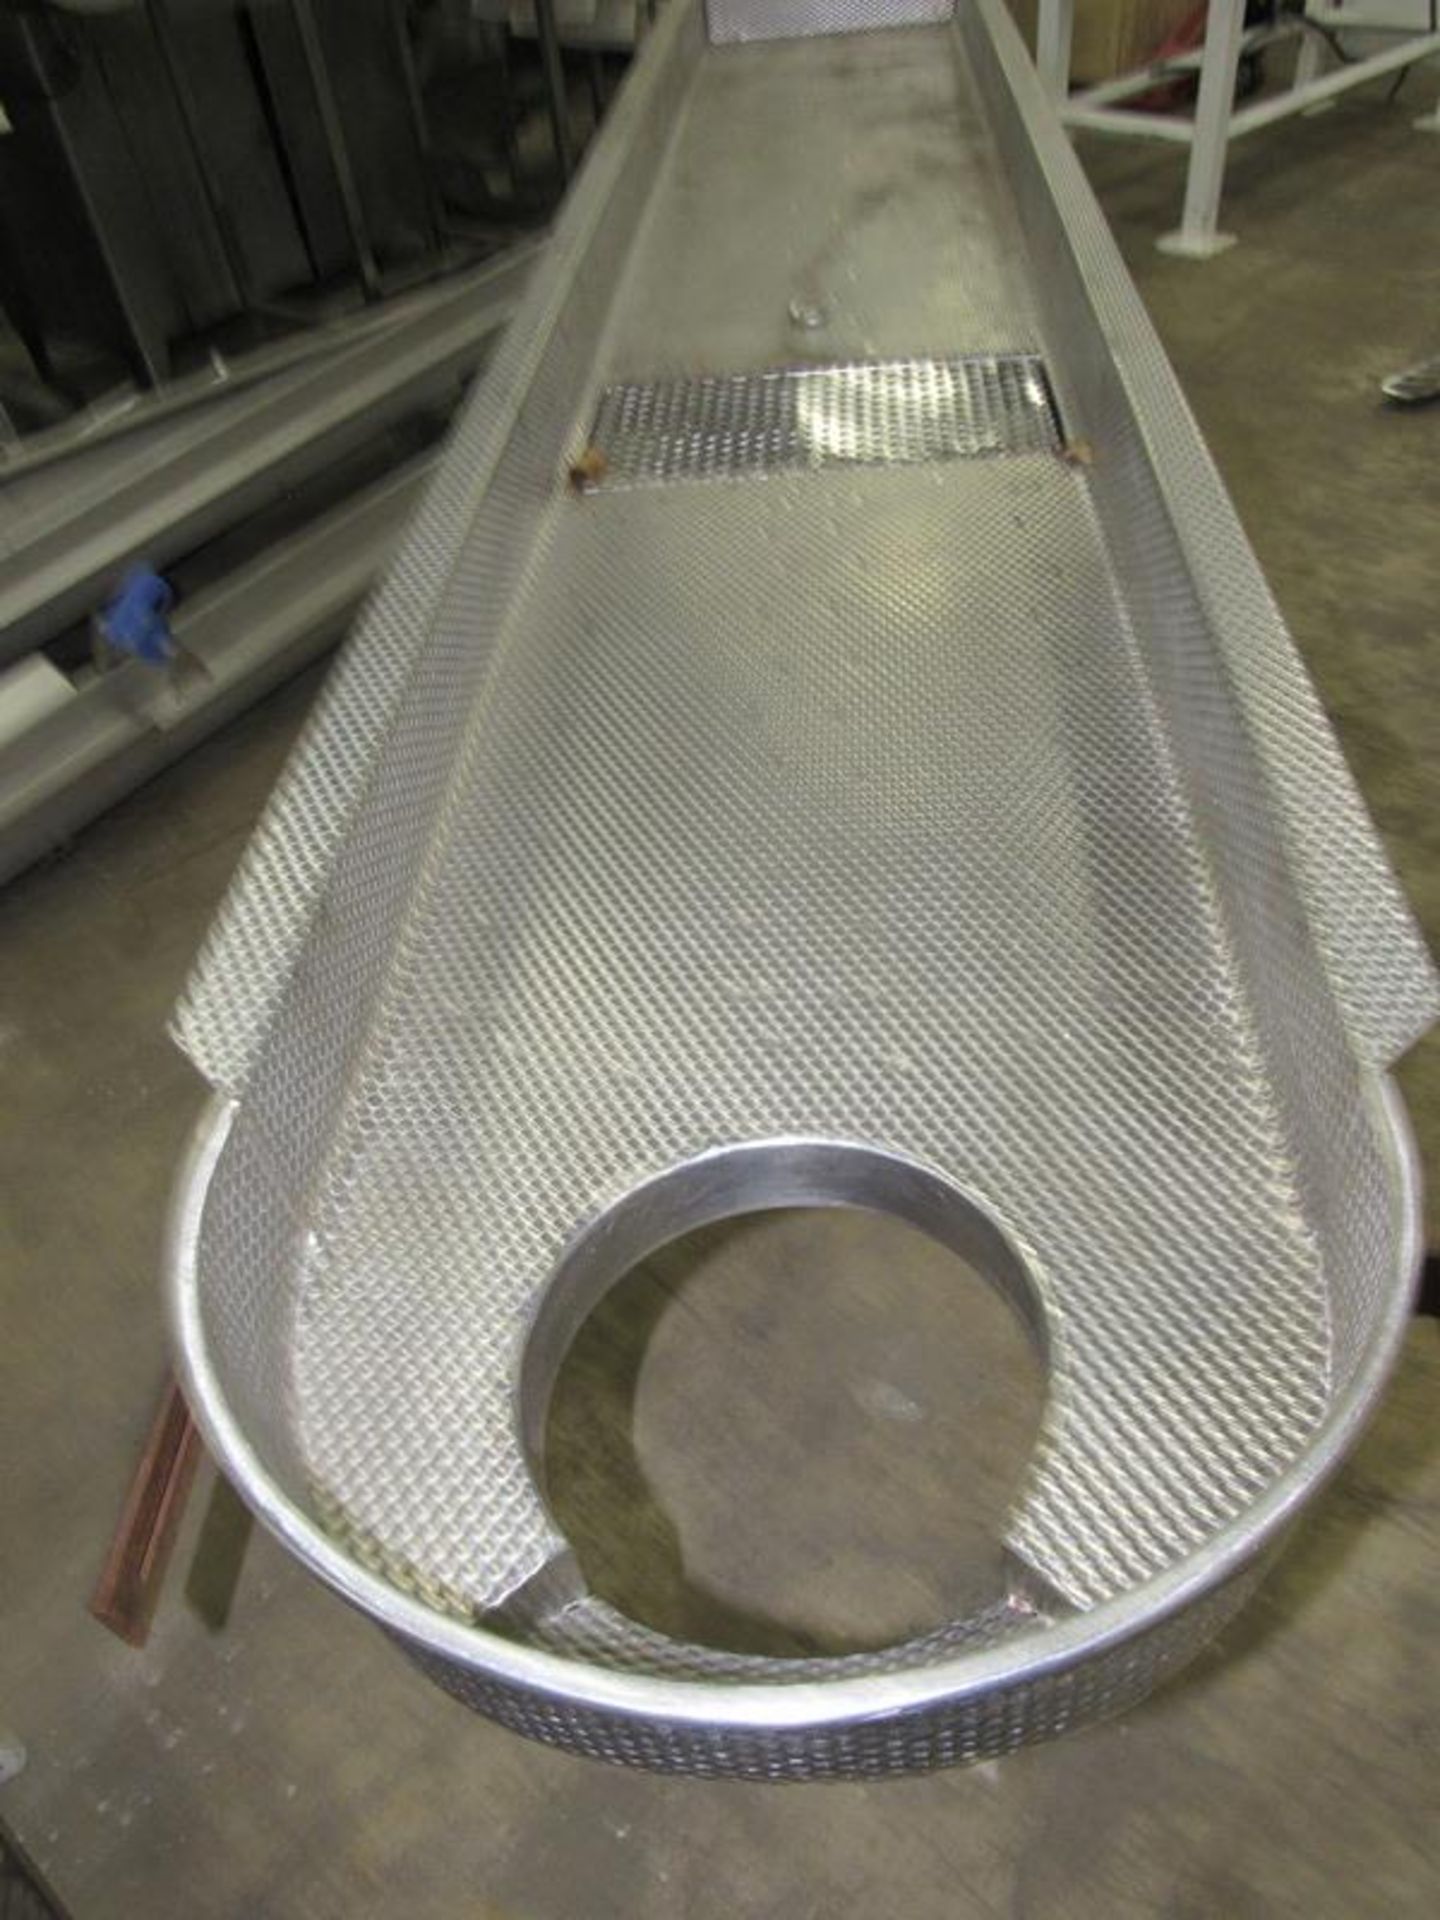 Smalley Mdl. EMC2t Vibratory Conveyor, dimpled stainless steel tray, 18" W X 115" L X 4" D, 9" - Image 5 of 6